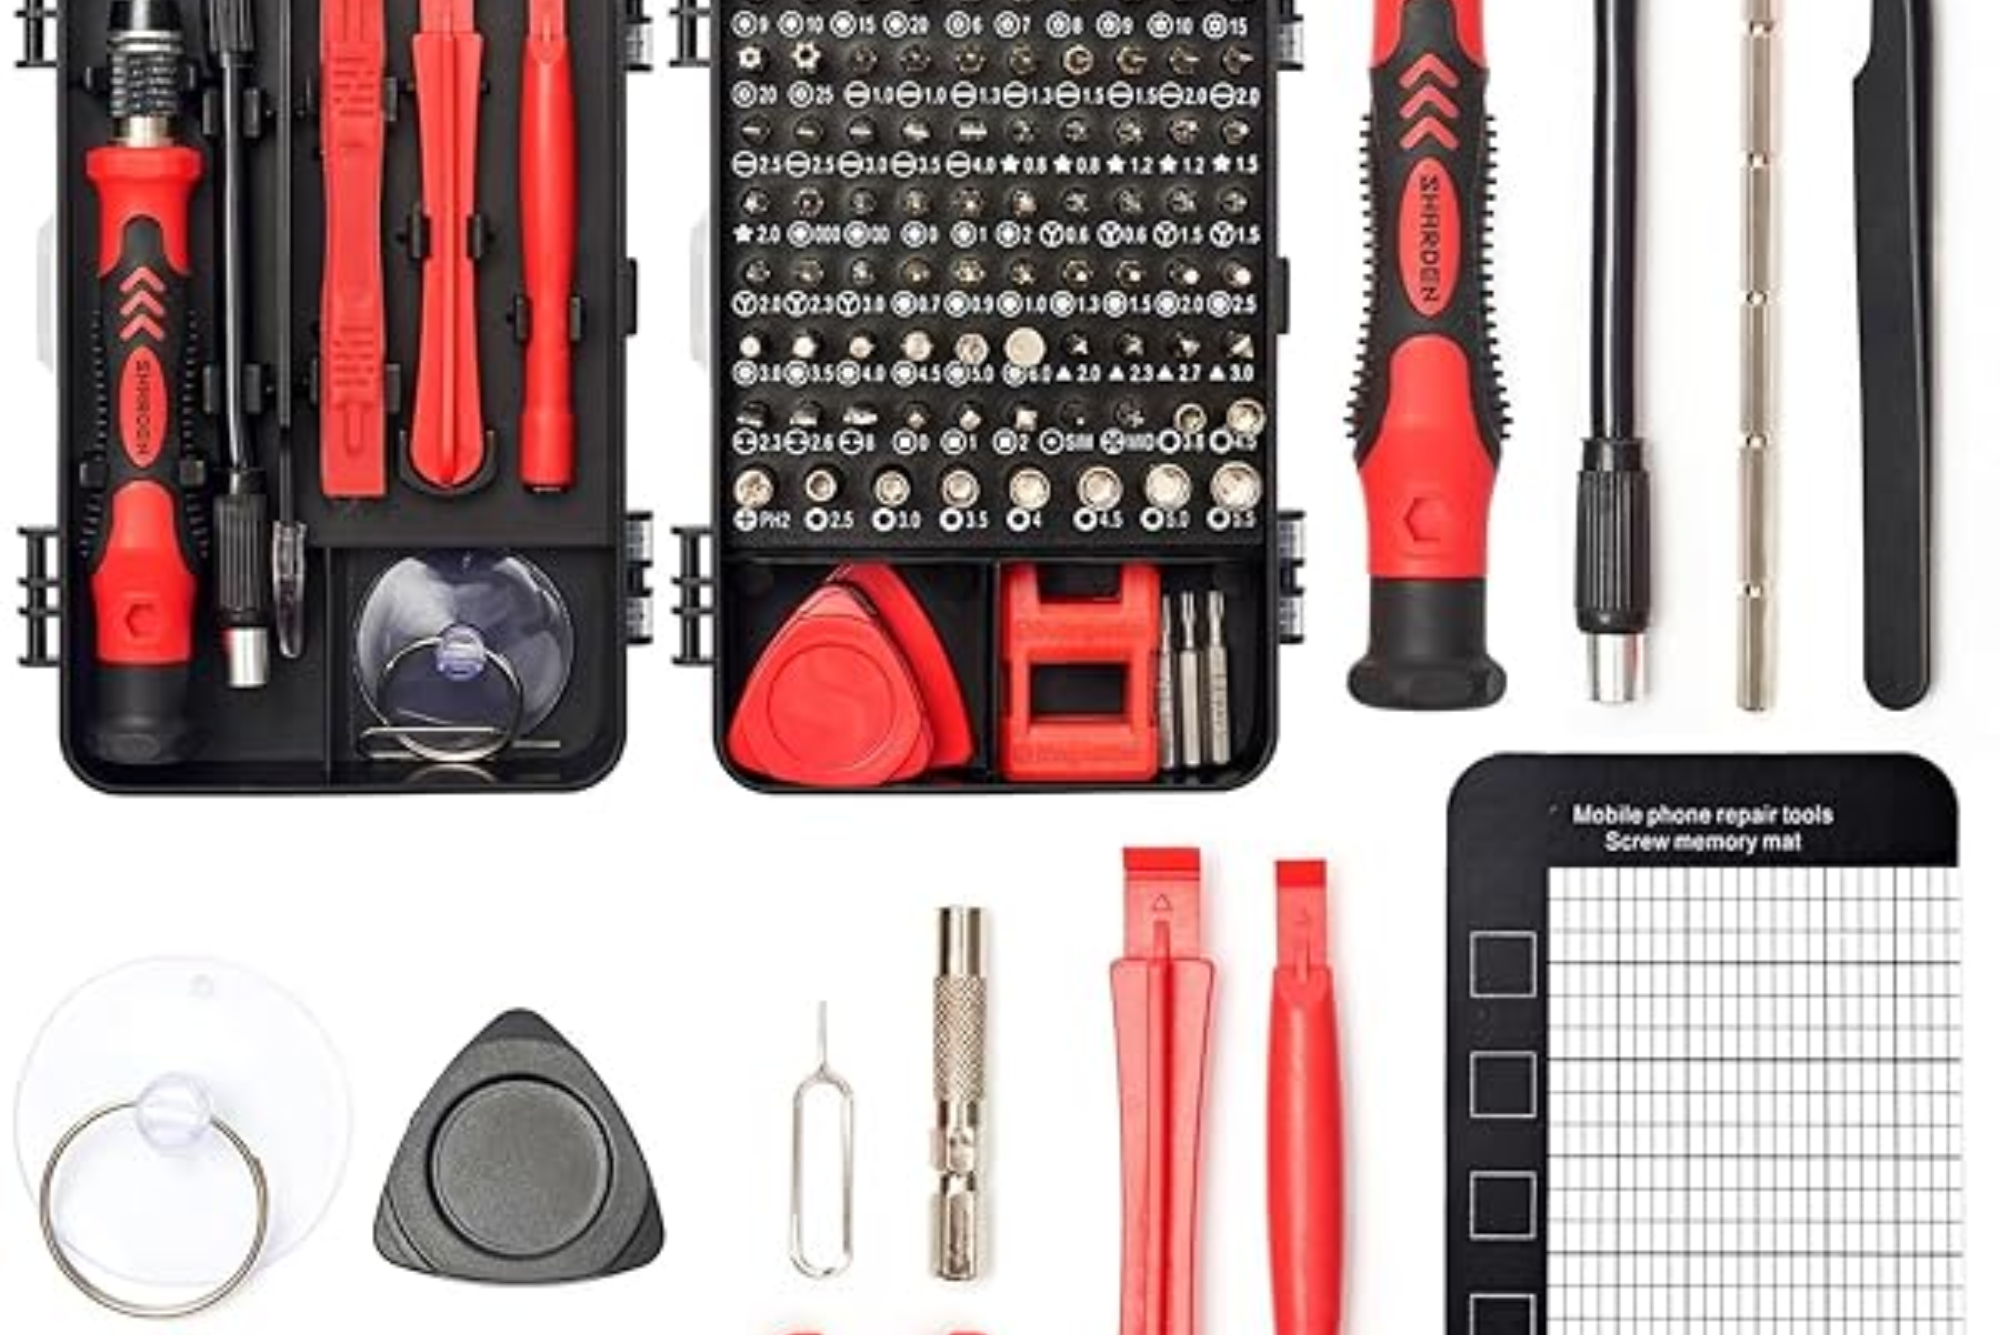 Jakemy's Precision Screwdrivers Simplify Home Repair Projects